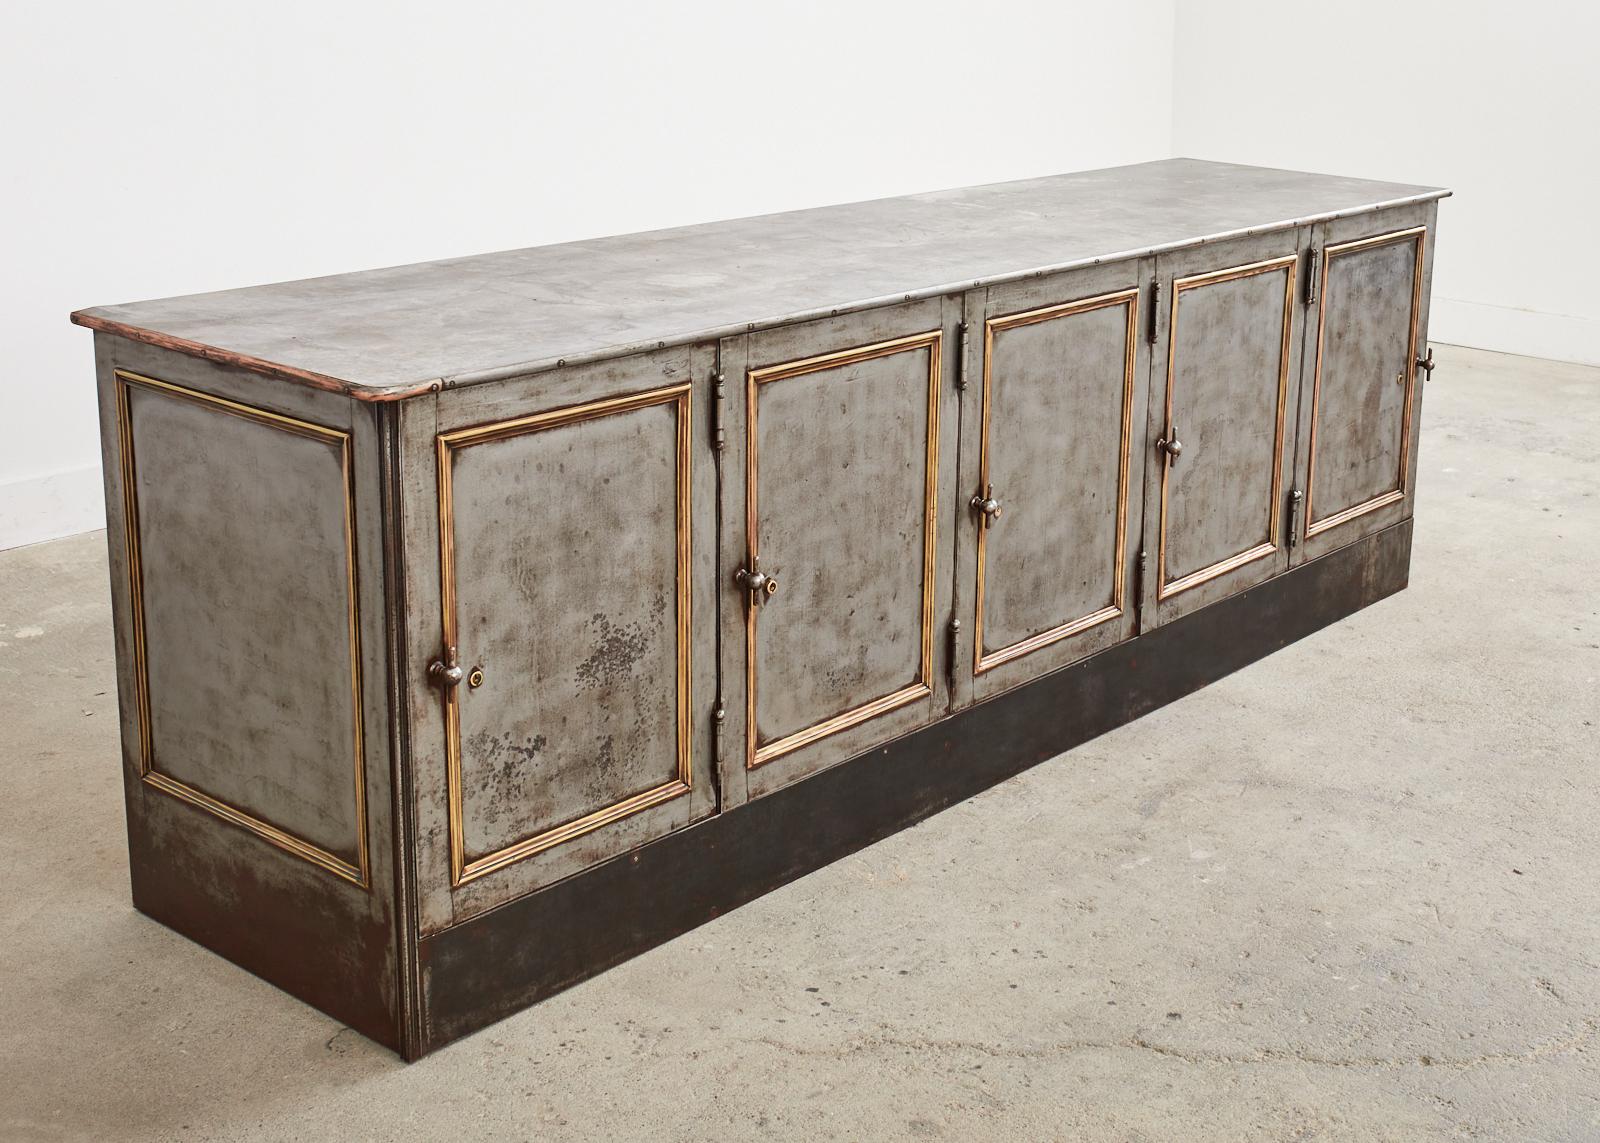 Monumental late 19th century American industrial style steel safe cabinet having bronze mounted doors. Fantastic design from an upscale east coast department store that could serve as a sideboard, server, buffet, credenza, or console. Very heavy and